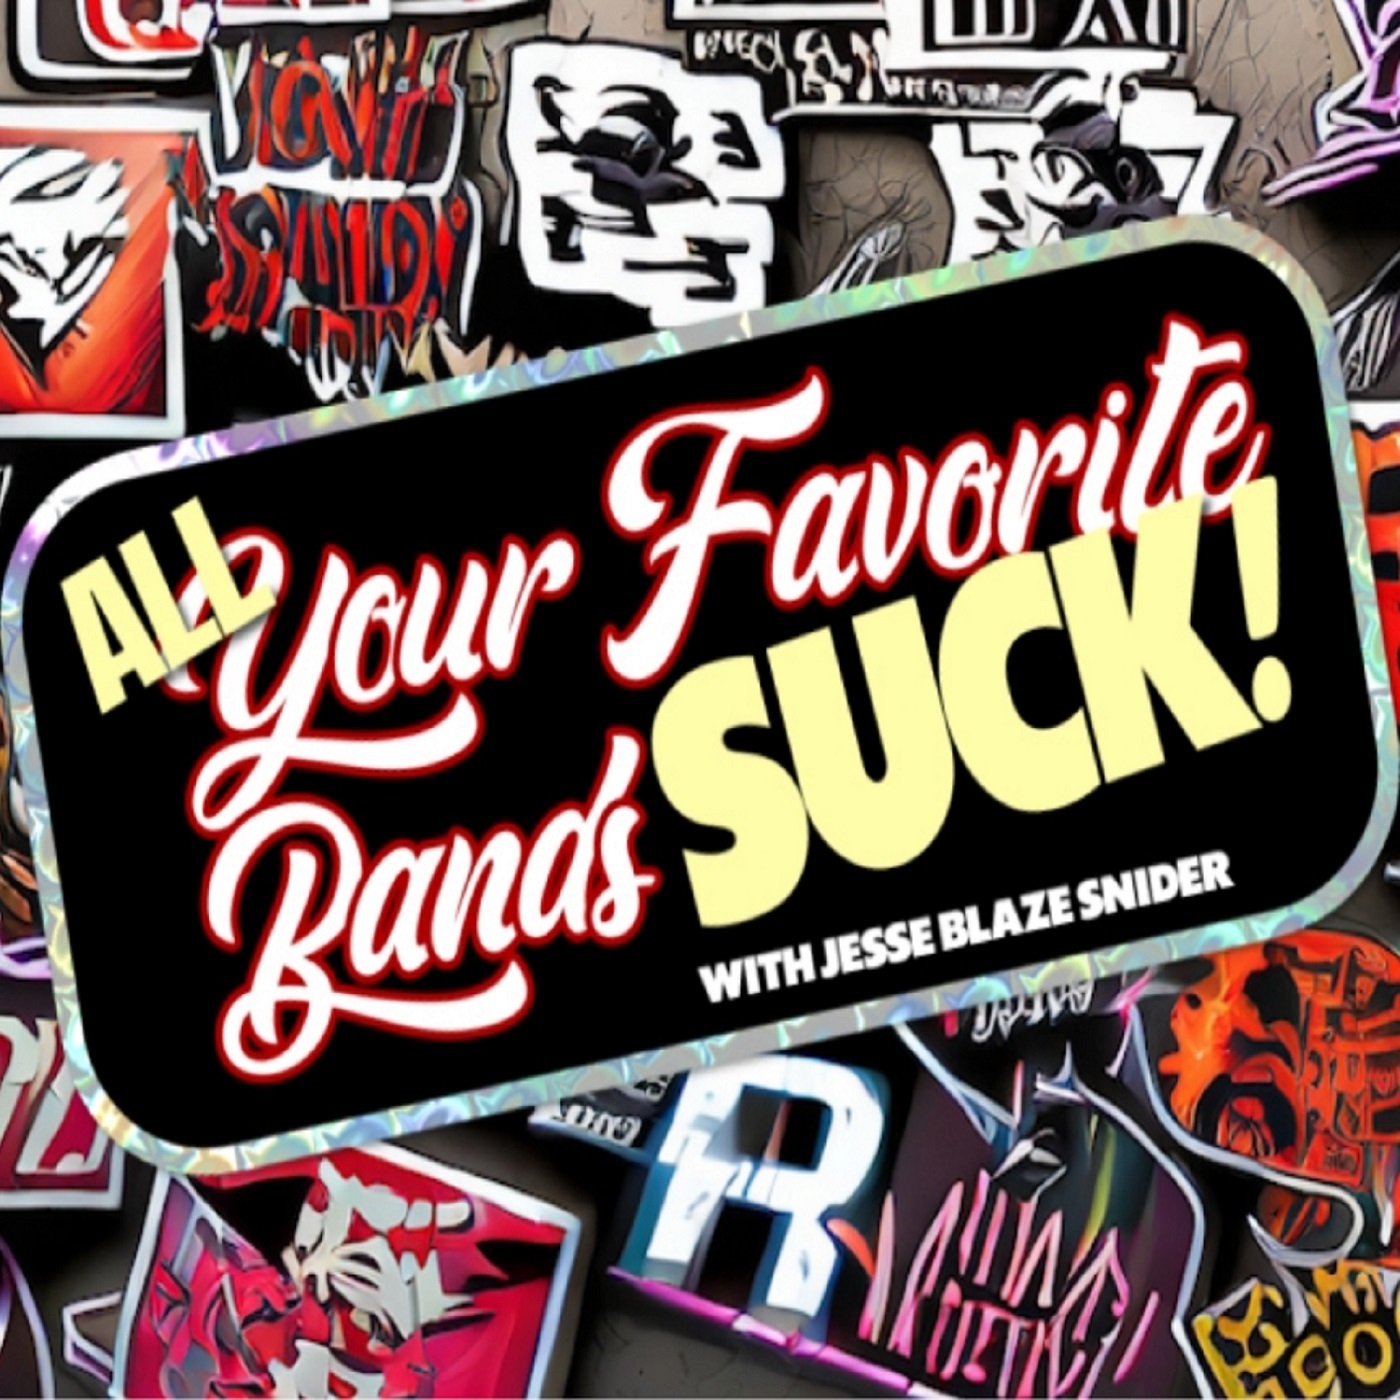 ALL Your Favorite Bands SUCK! - Green Day